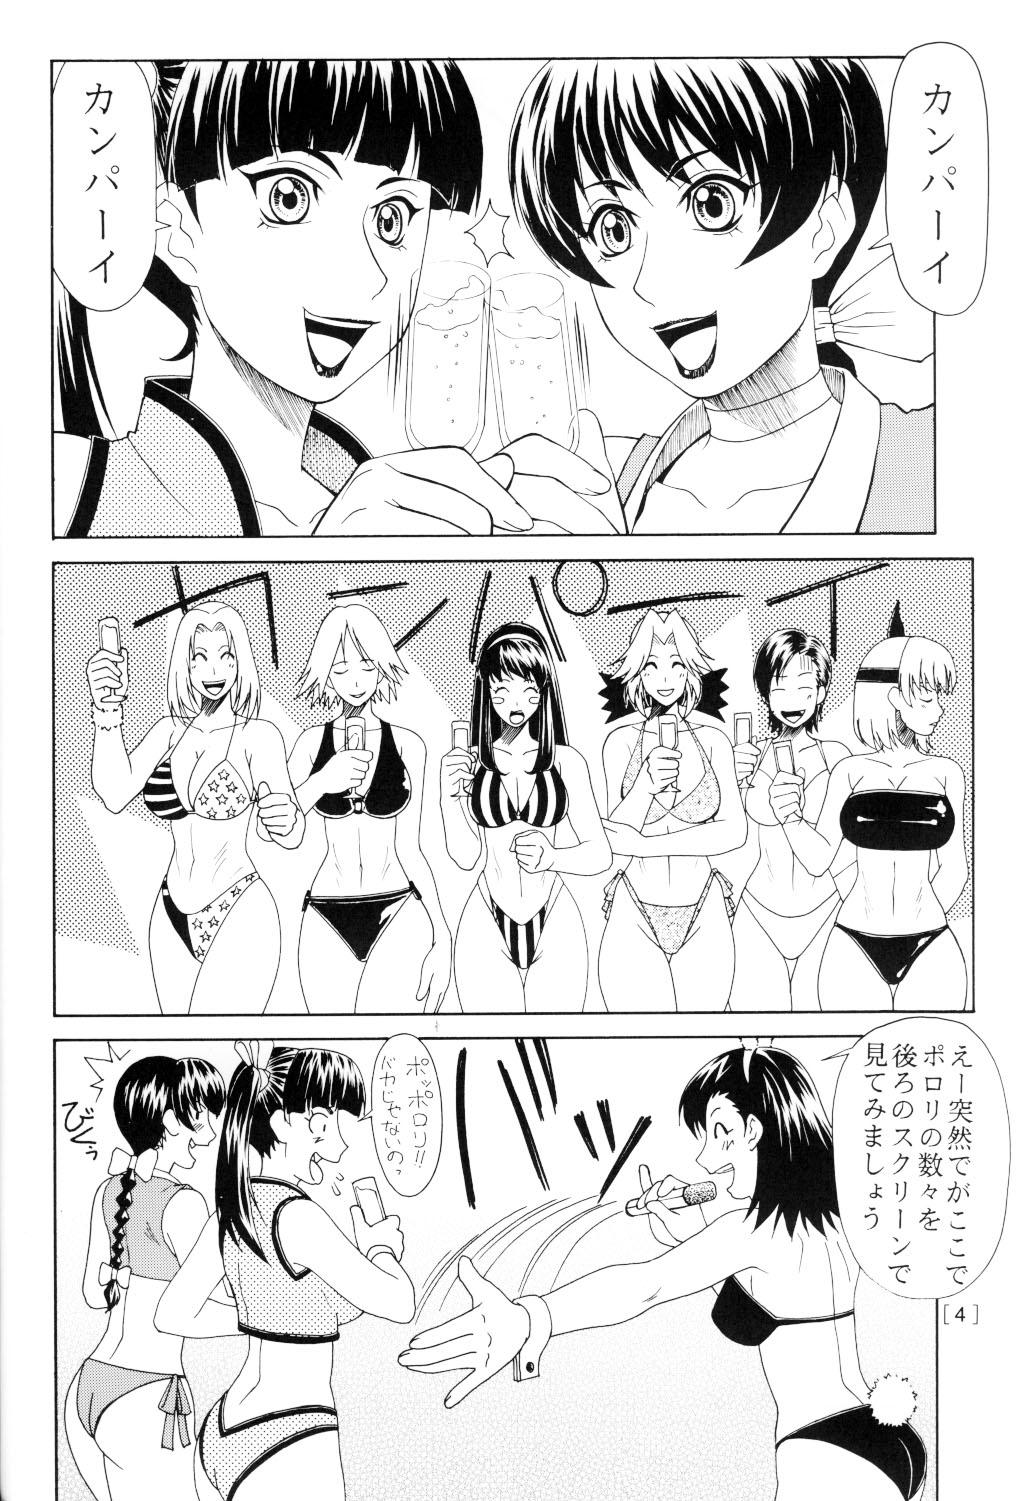 Tgirls Mikicy Vol. 2 - Dead or alive Ace attorney Gays - Page 5